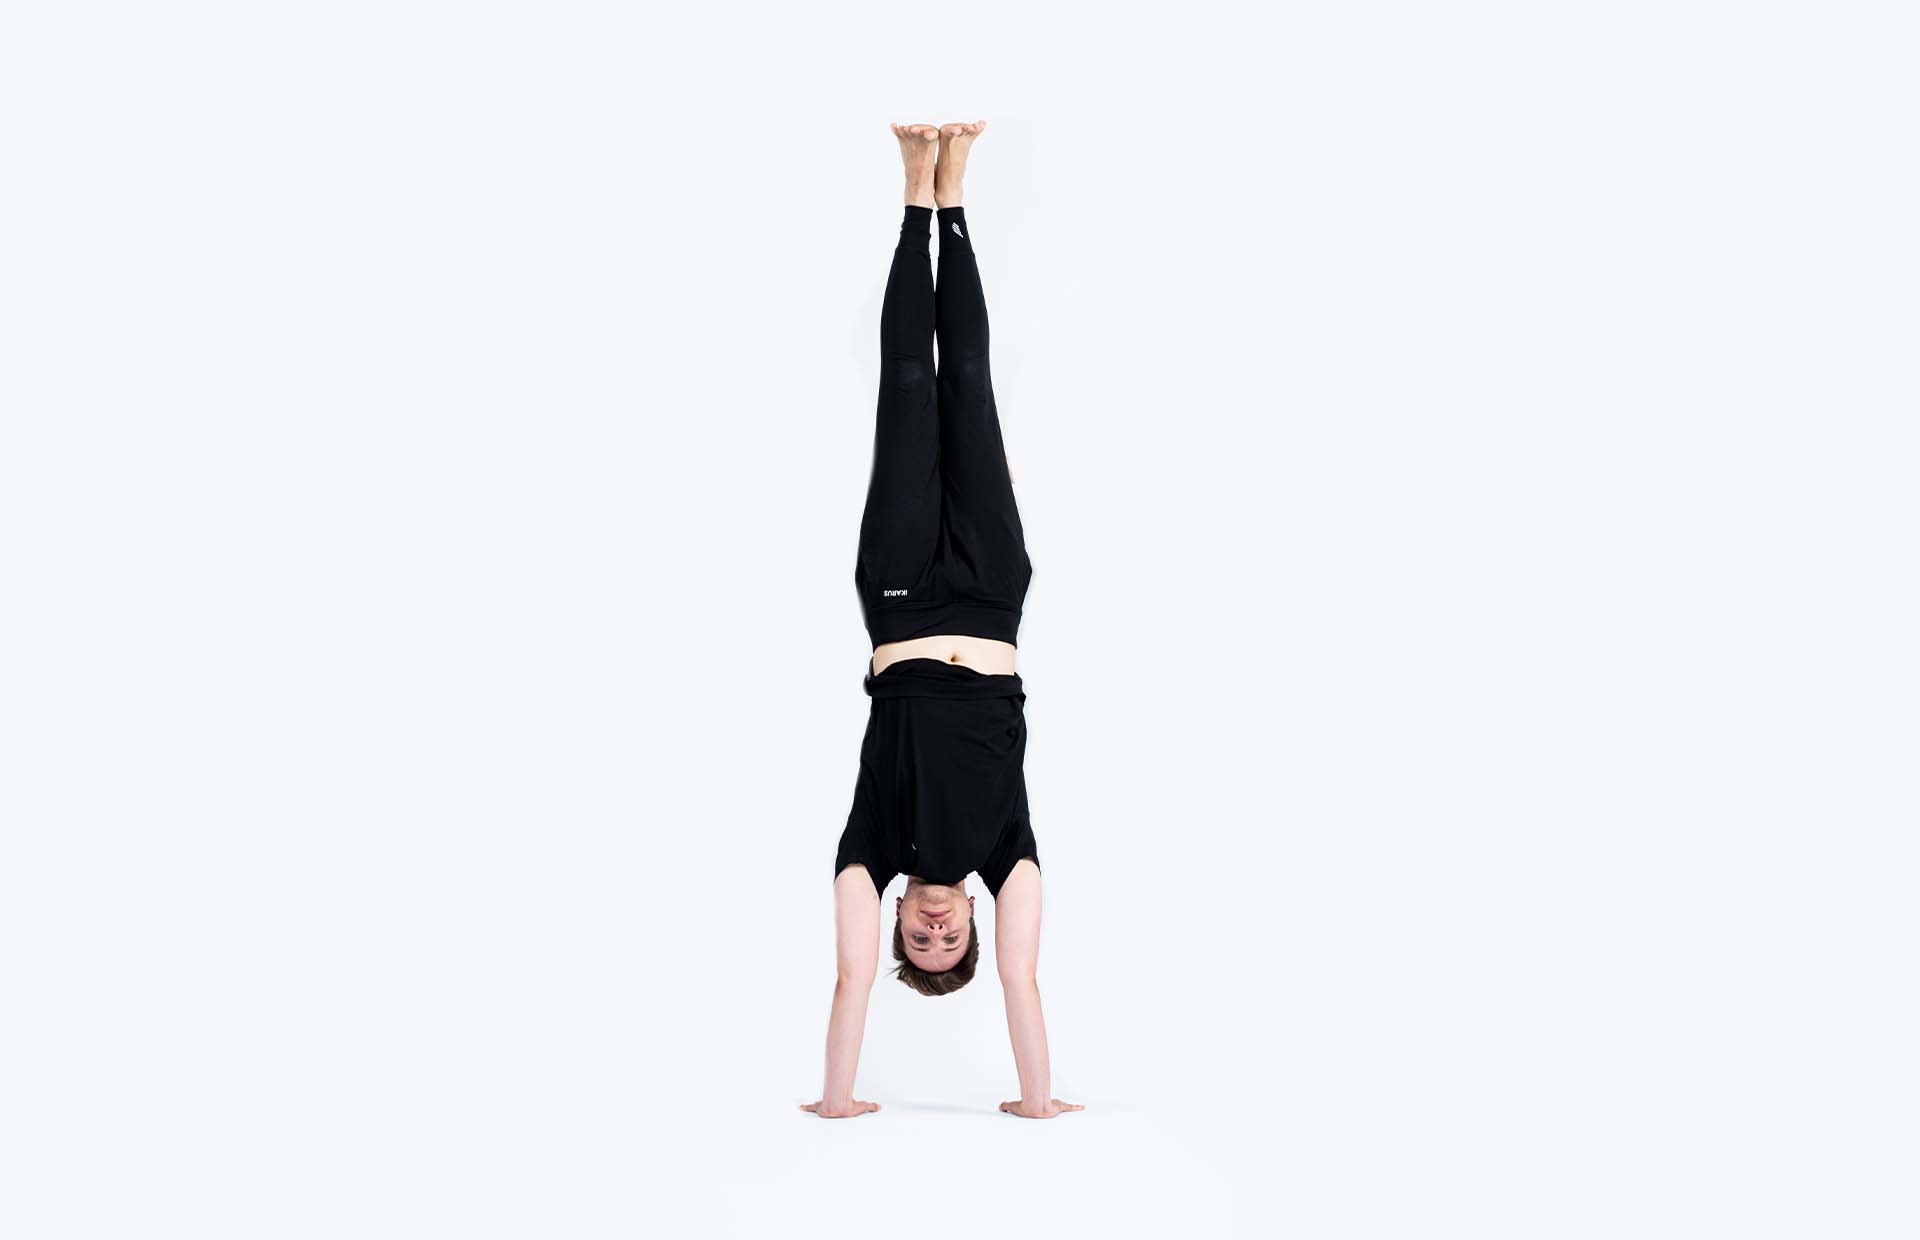 A person inverted into Adho Mukha Vrksasana (Handstand)